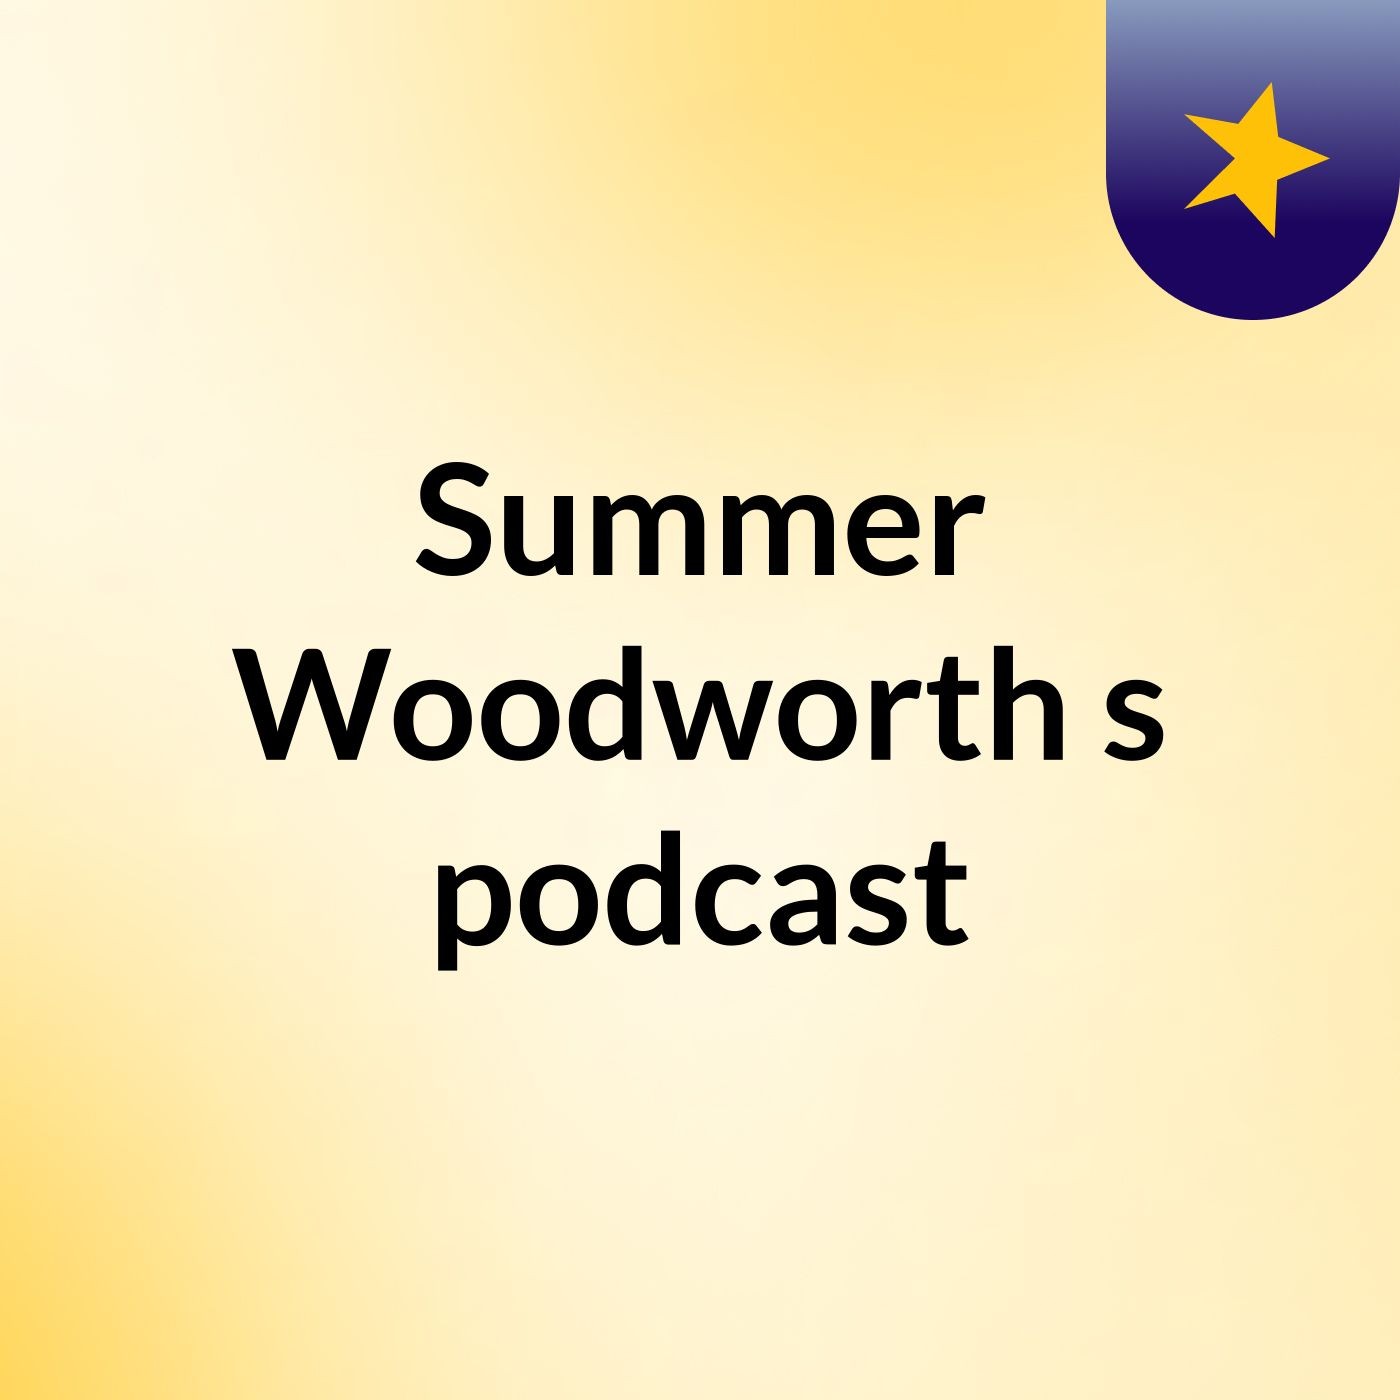 Summer Woodworth's podcast